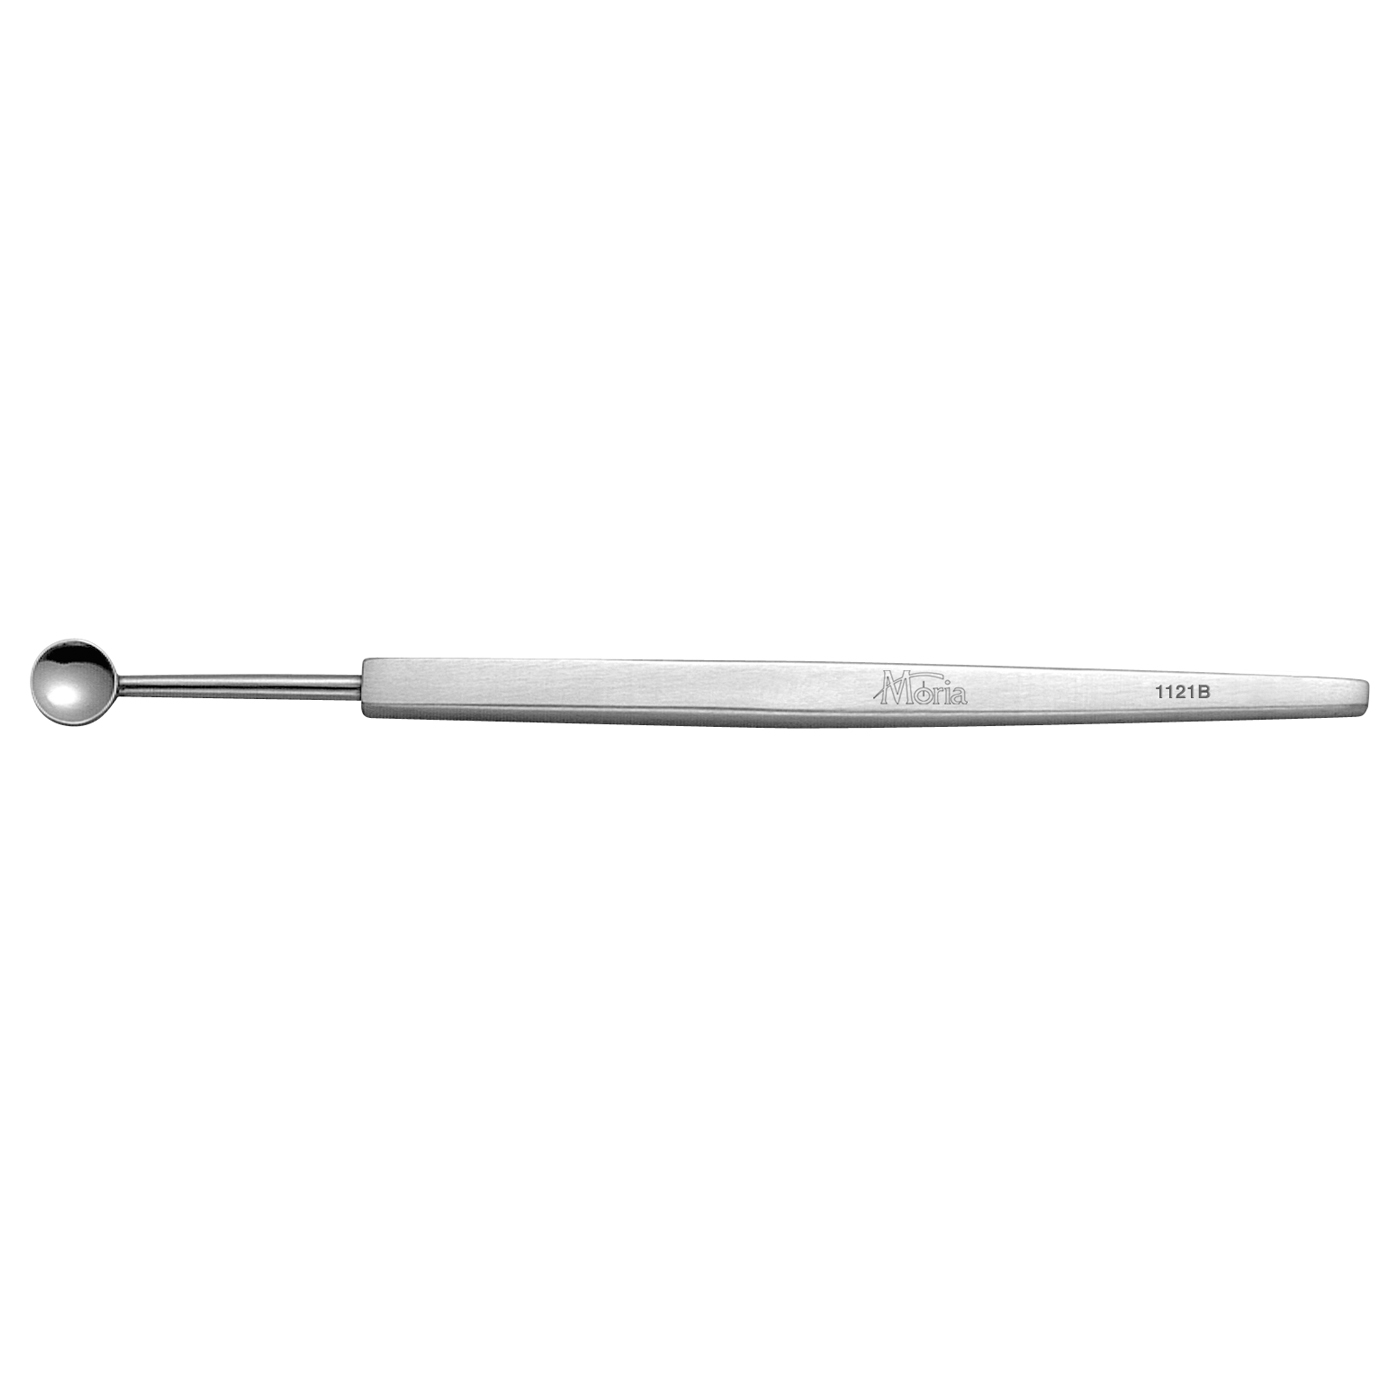 When to use an ophthalmic surgical curette?